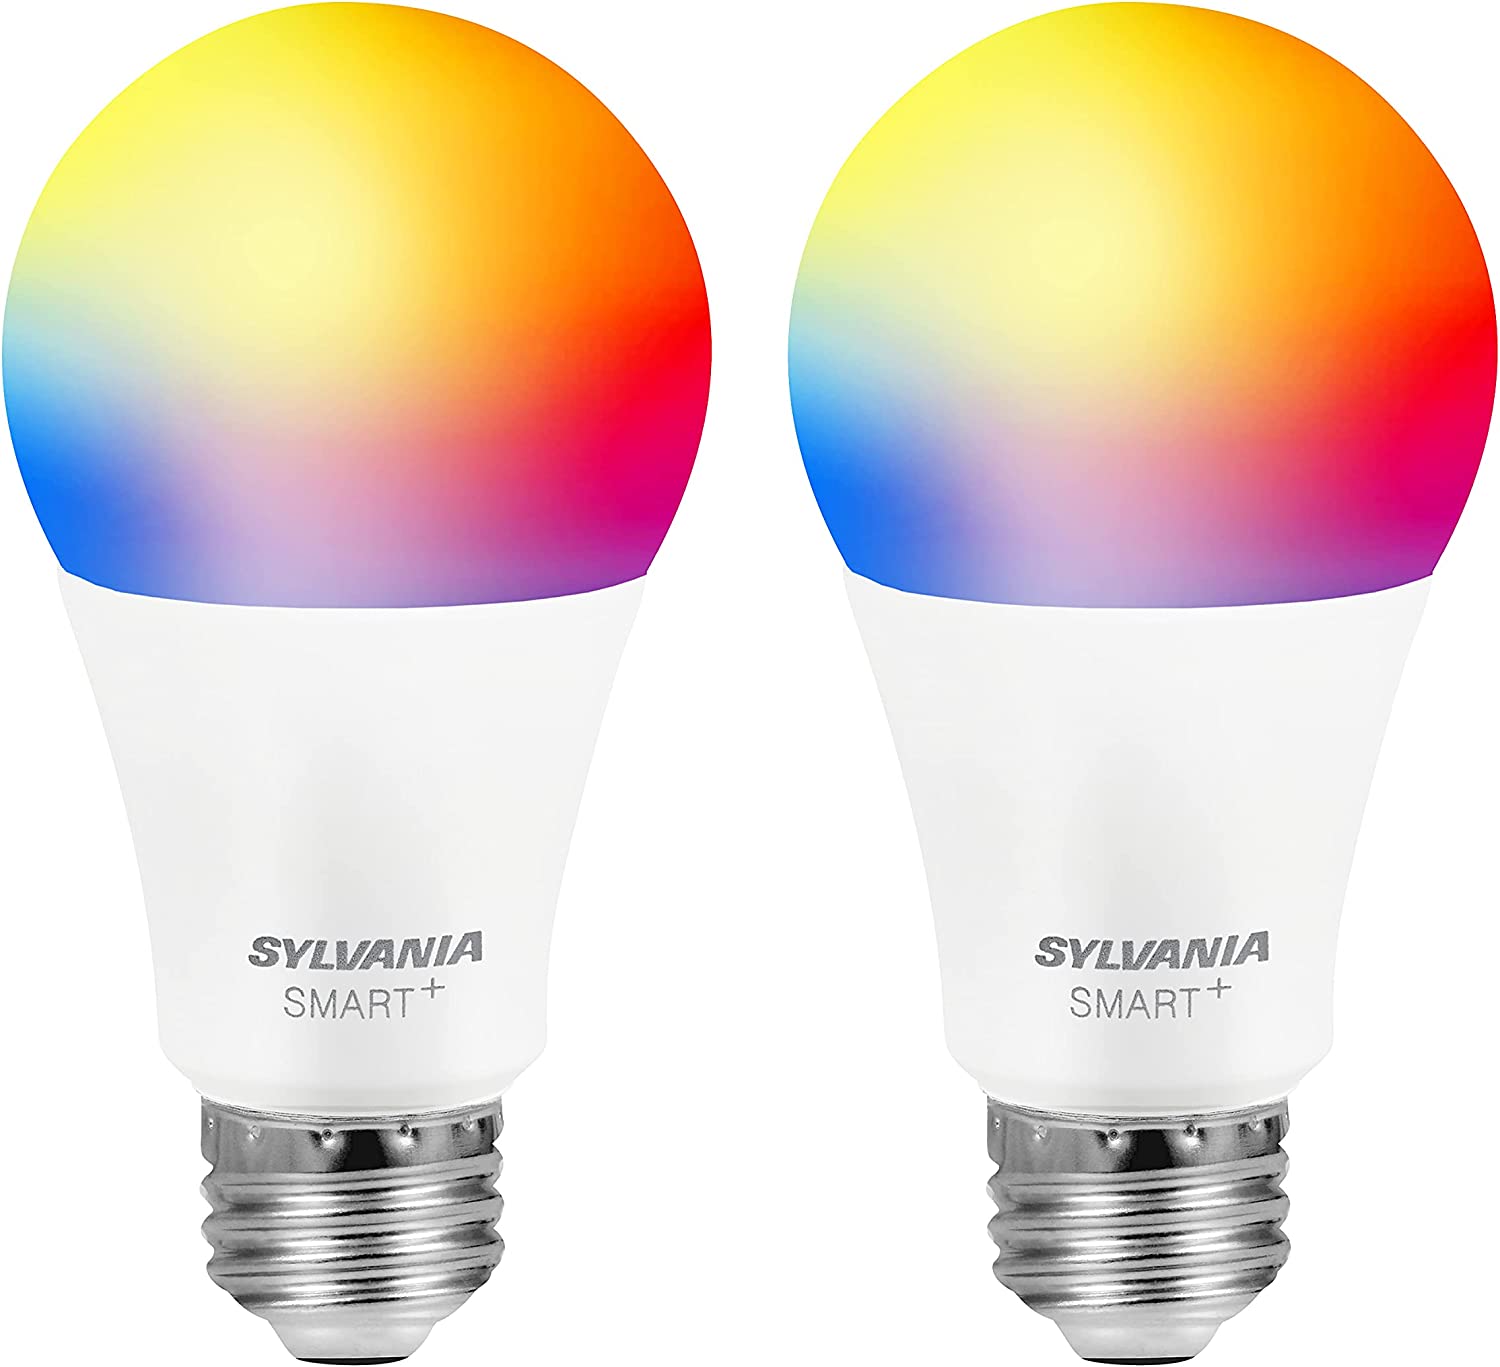 2-Pack Sylvania Bluetooth Mesh Full-Color LED Smart Light Bulb (Used - Like New) $2.76 + Free Shipping w/ Prime or Orders $25+